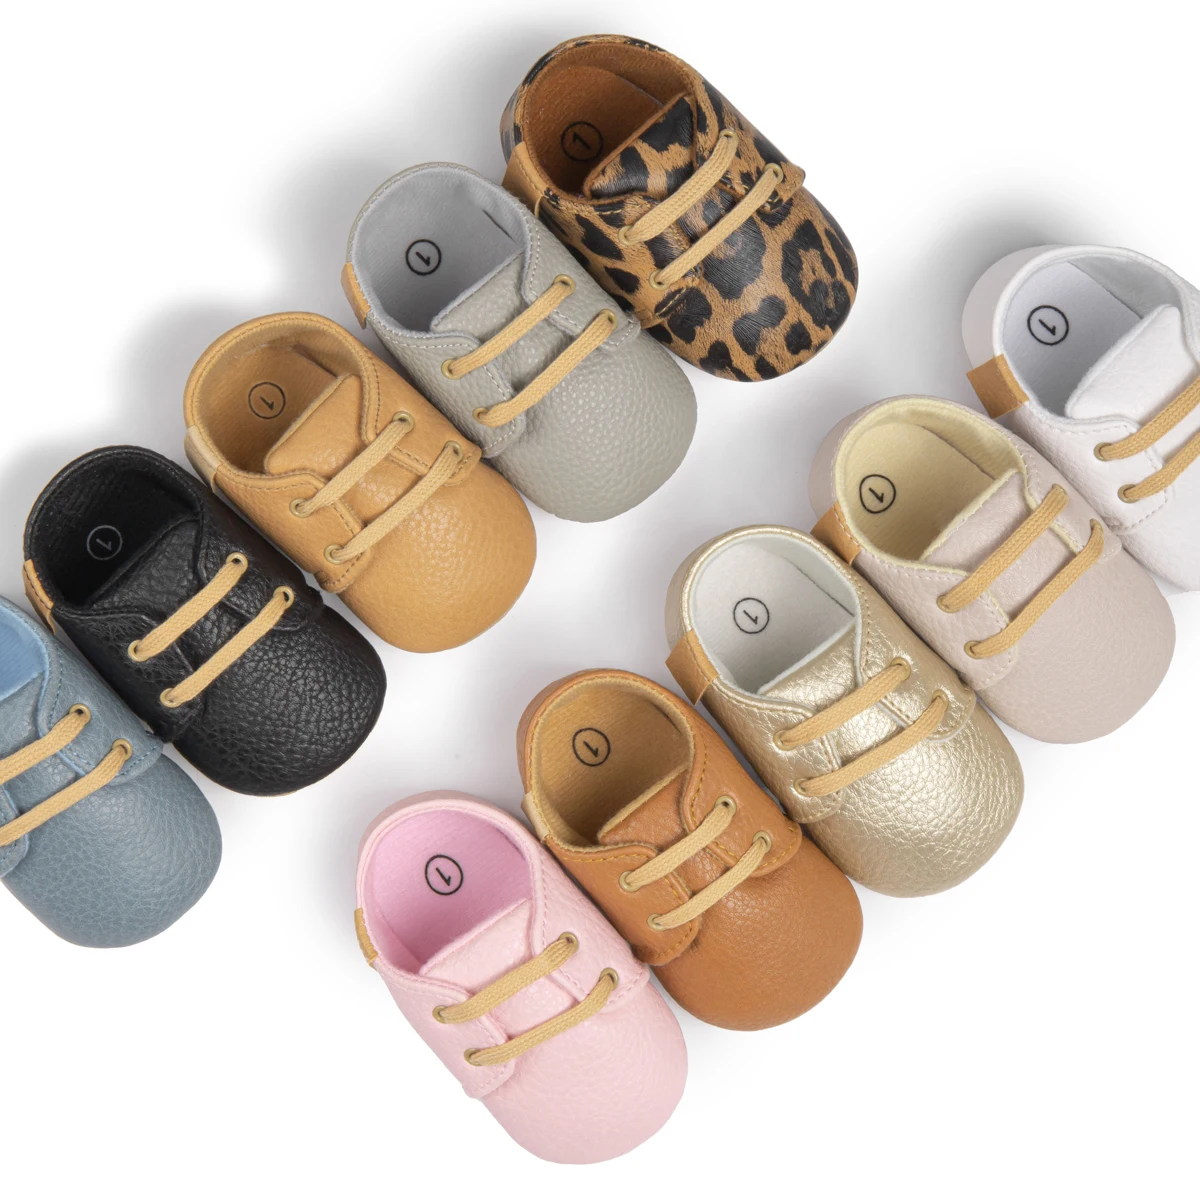 Fashion Outdoor Newborn Sneakers Infant First Walker Rubber Soft Sole Toddler Baby Dress Shoes For Babies